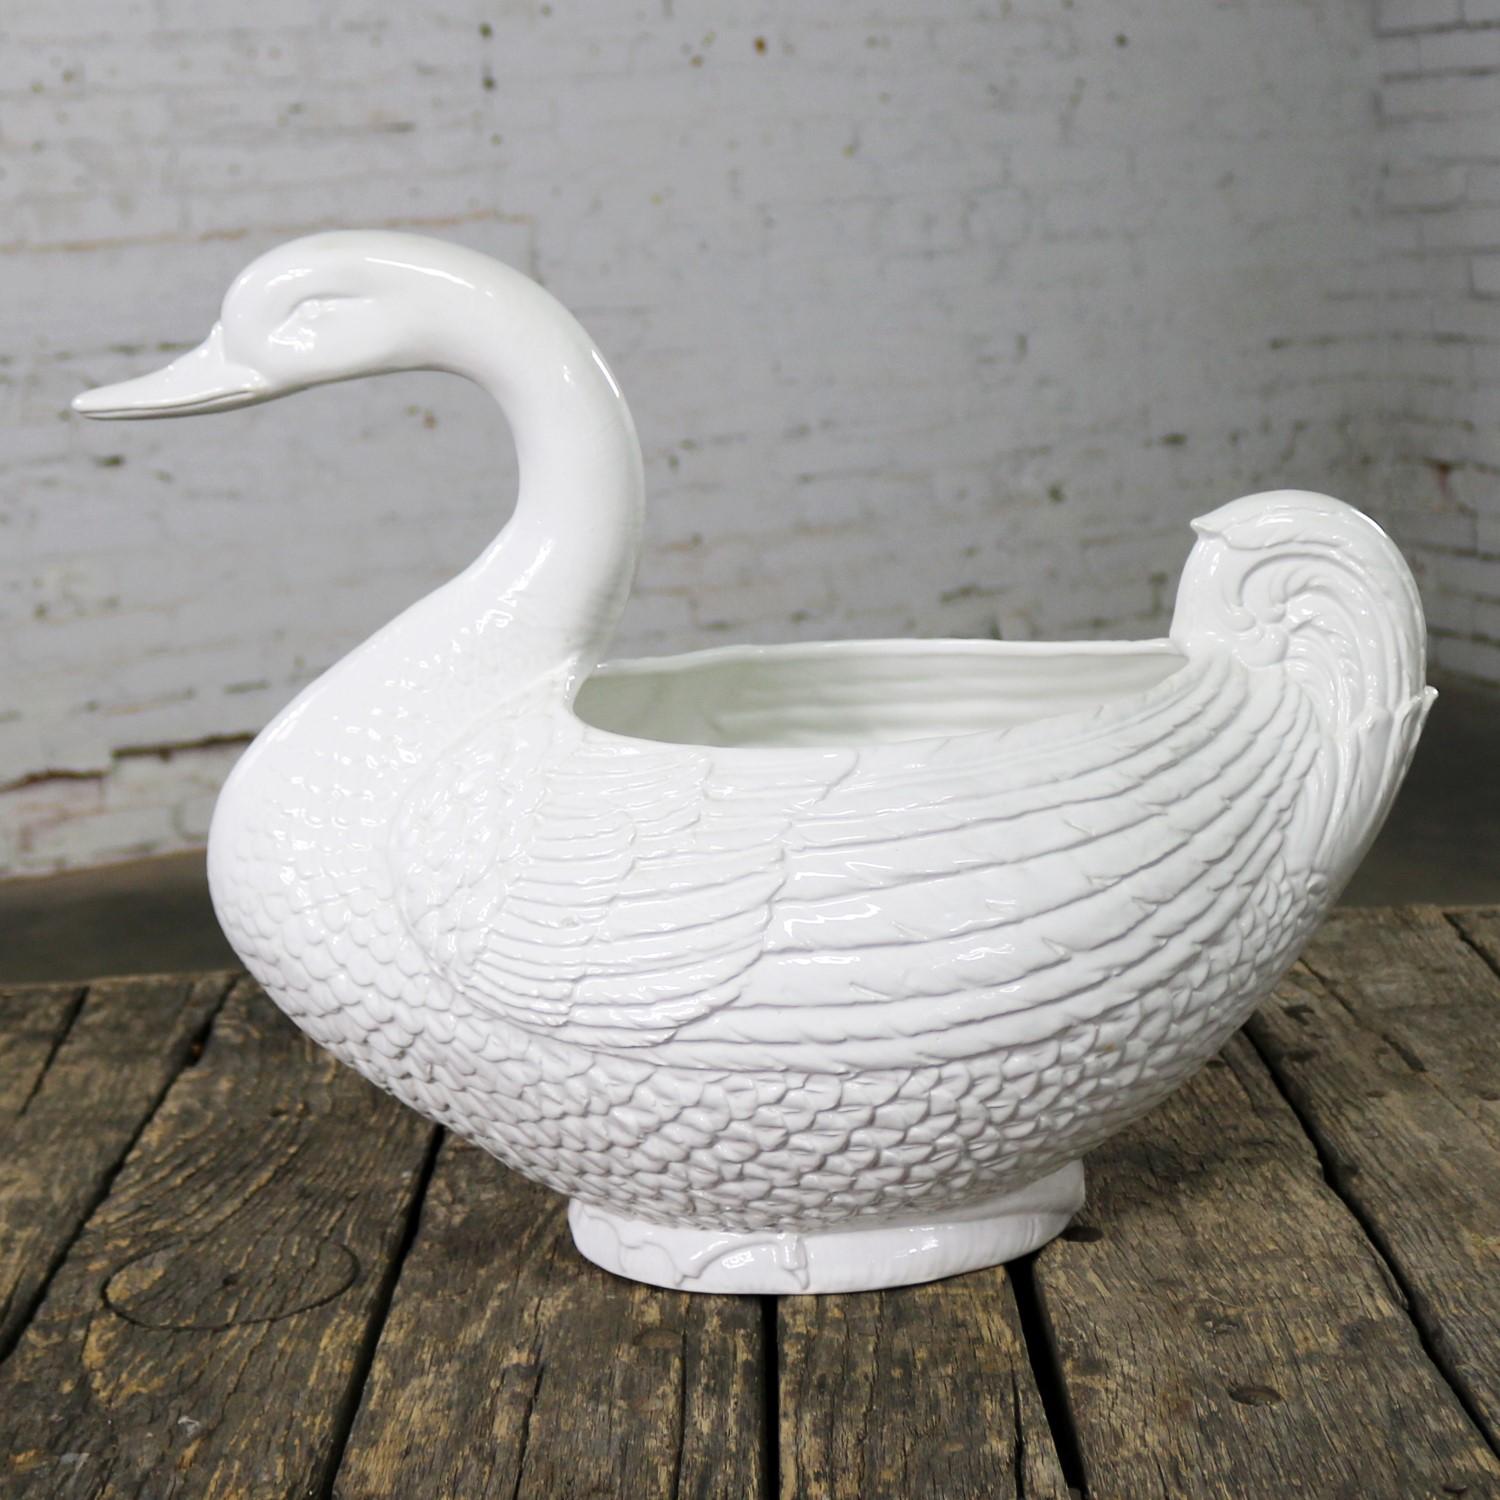 Handsome porcelain large pure white swan figural jardinière planter or serving tureen. It is in wonderful vintage condition with a couple small glaze chips, but no cracks, or crazing that we have detected. Please see photos. Circa mid-20th